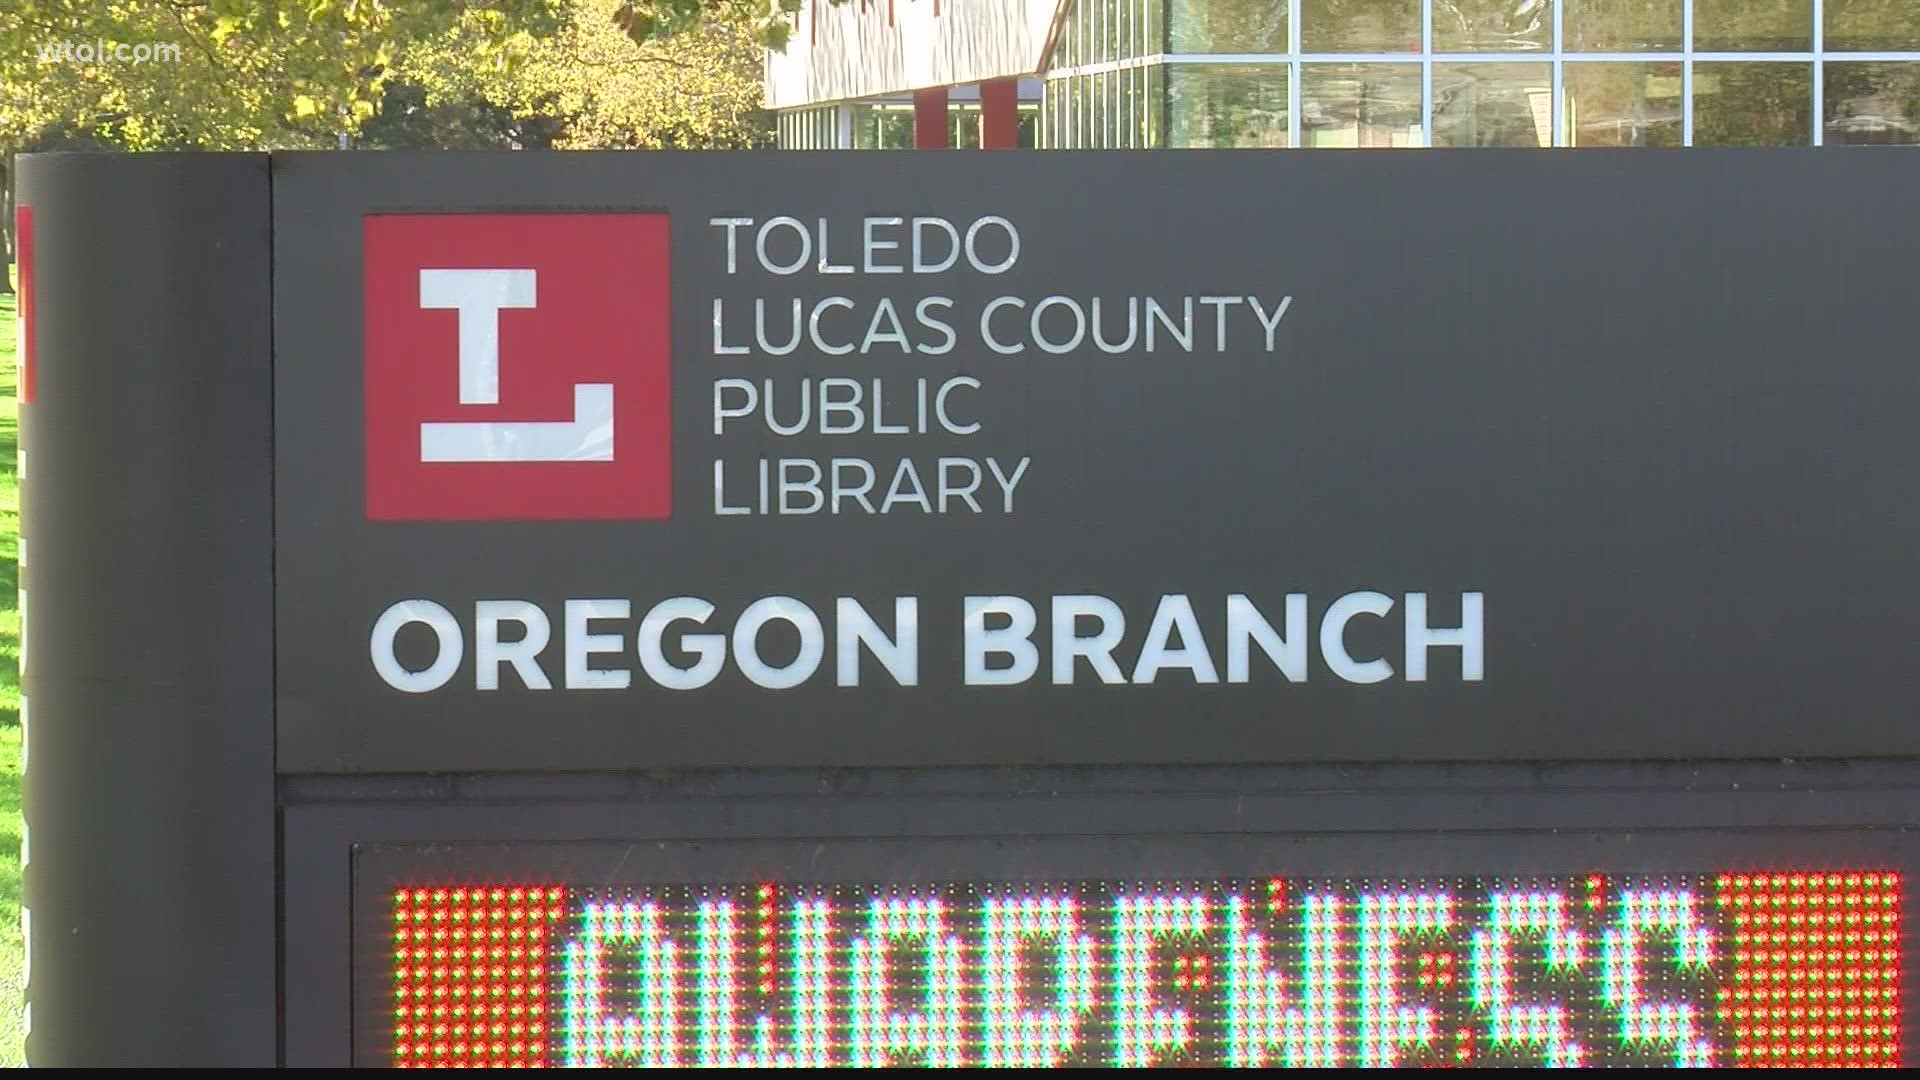 The Toledo Lucas County Public Library reduced hours at the beginning of the COVID-19 pandemic as fewer people were visiting.